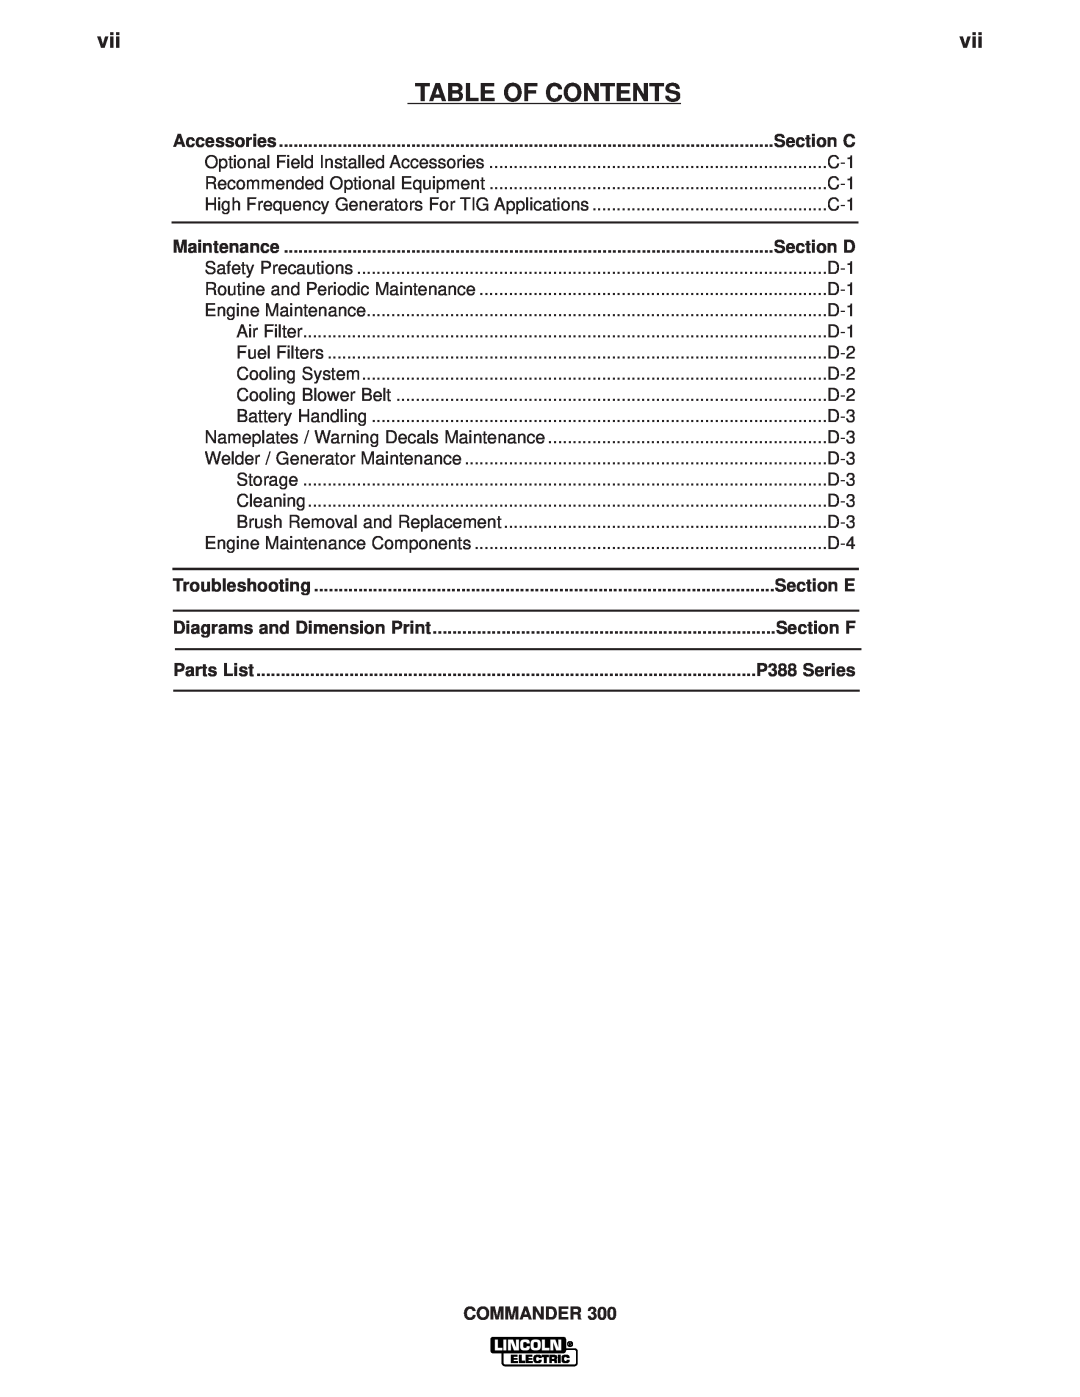 Lincoln Electric IM700-D manual Table Of Contents, Section C, Section D, Section E, Section F, P388 Series, Commander 